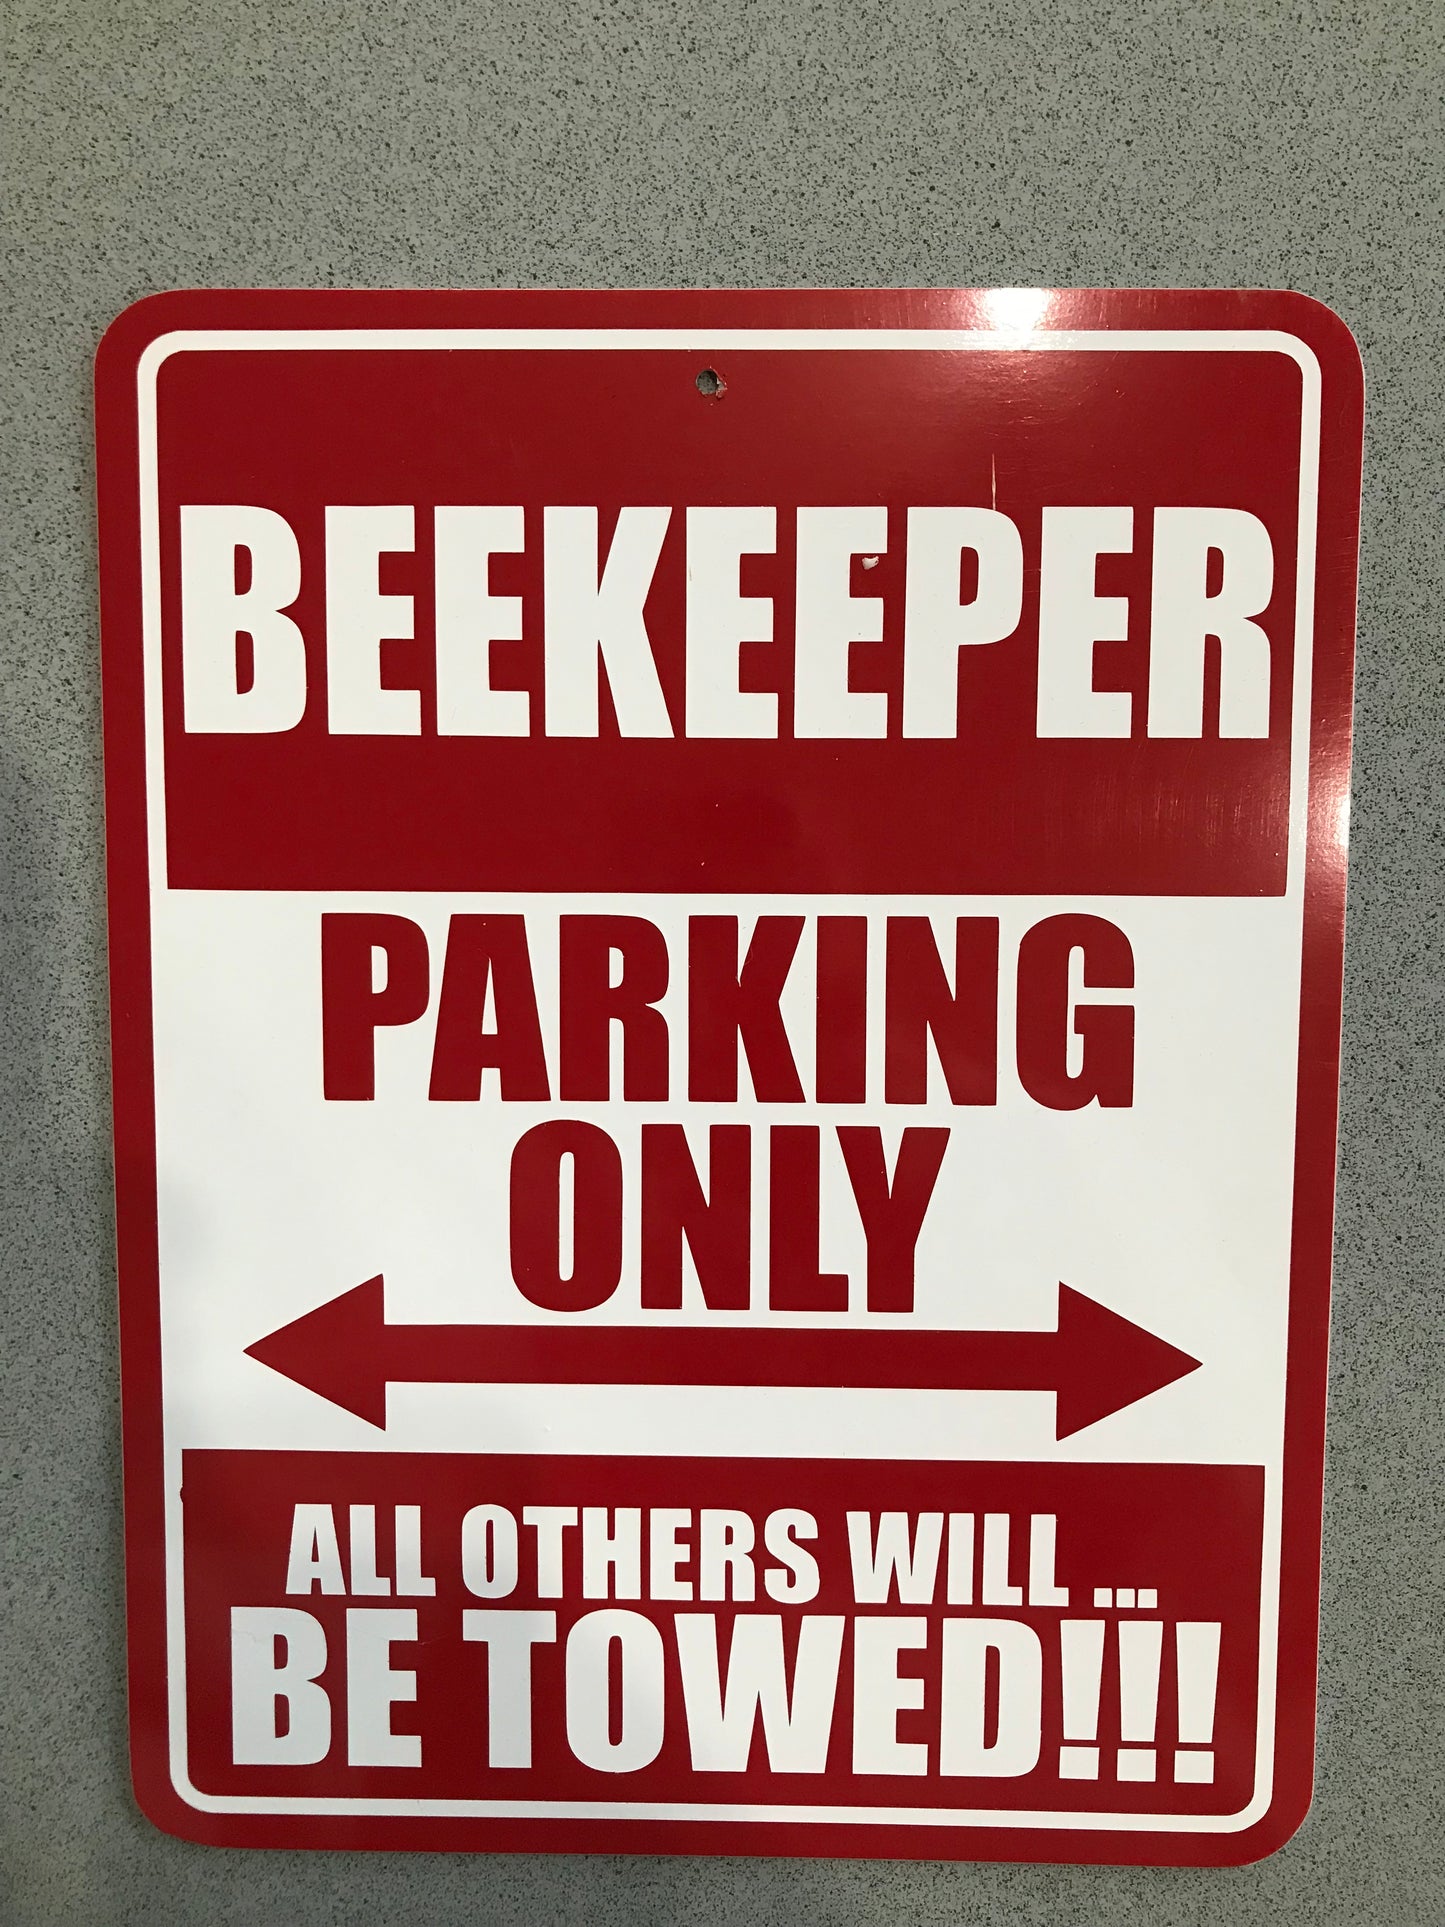 Beekeeper parking only all others towed